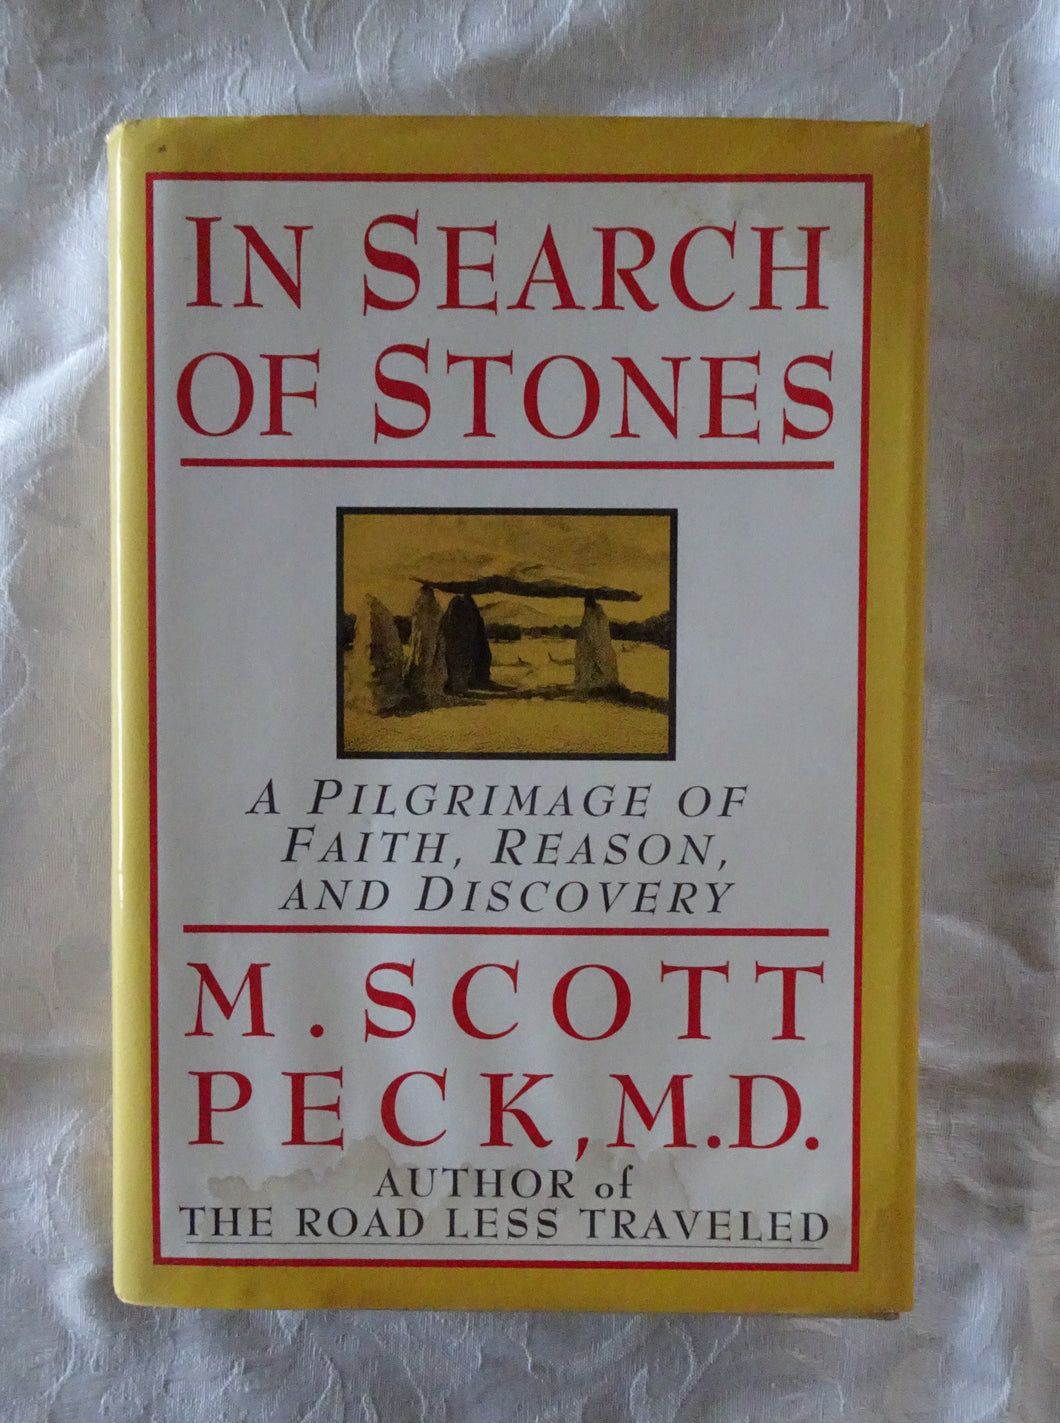 In Search of Stones  A Pilgrimage of Faith, Reason, and Discovery  by M. Scott Peck